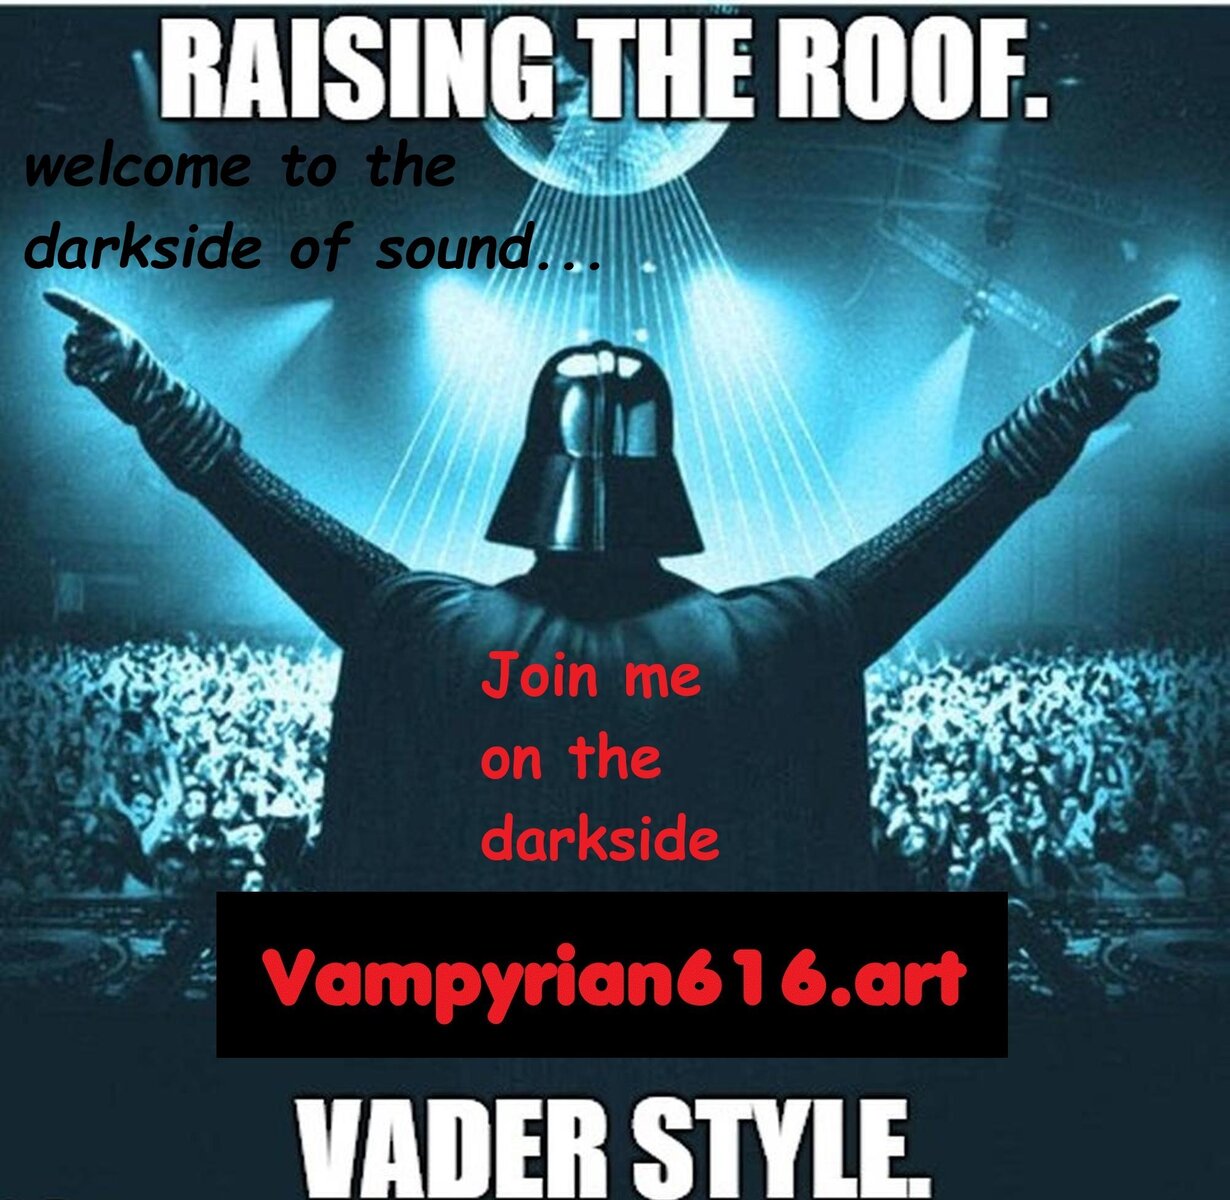 (Vader Syle) Cover.jpg